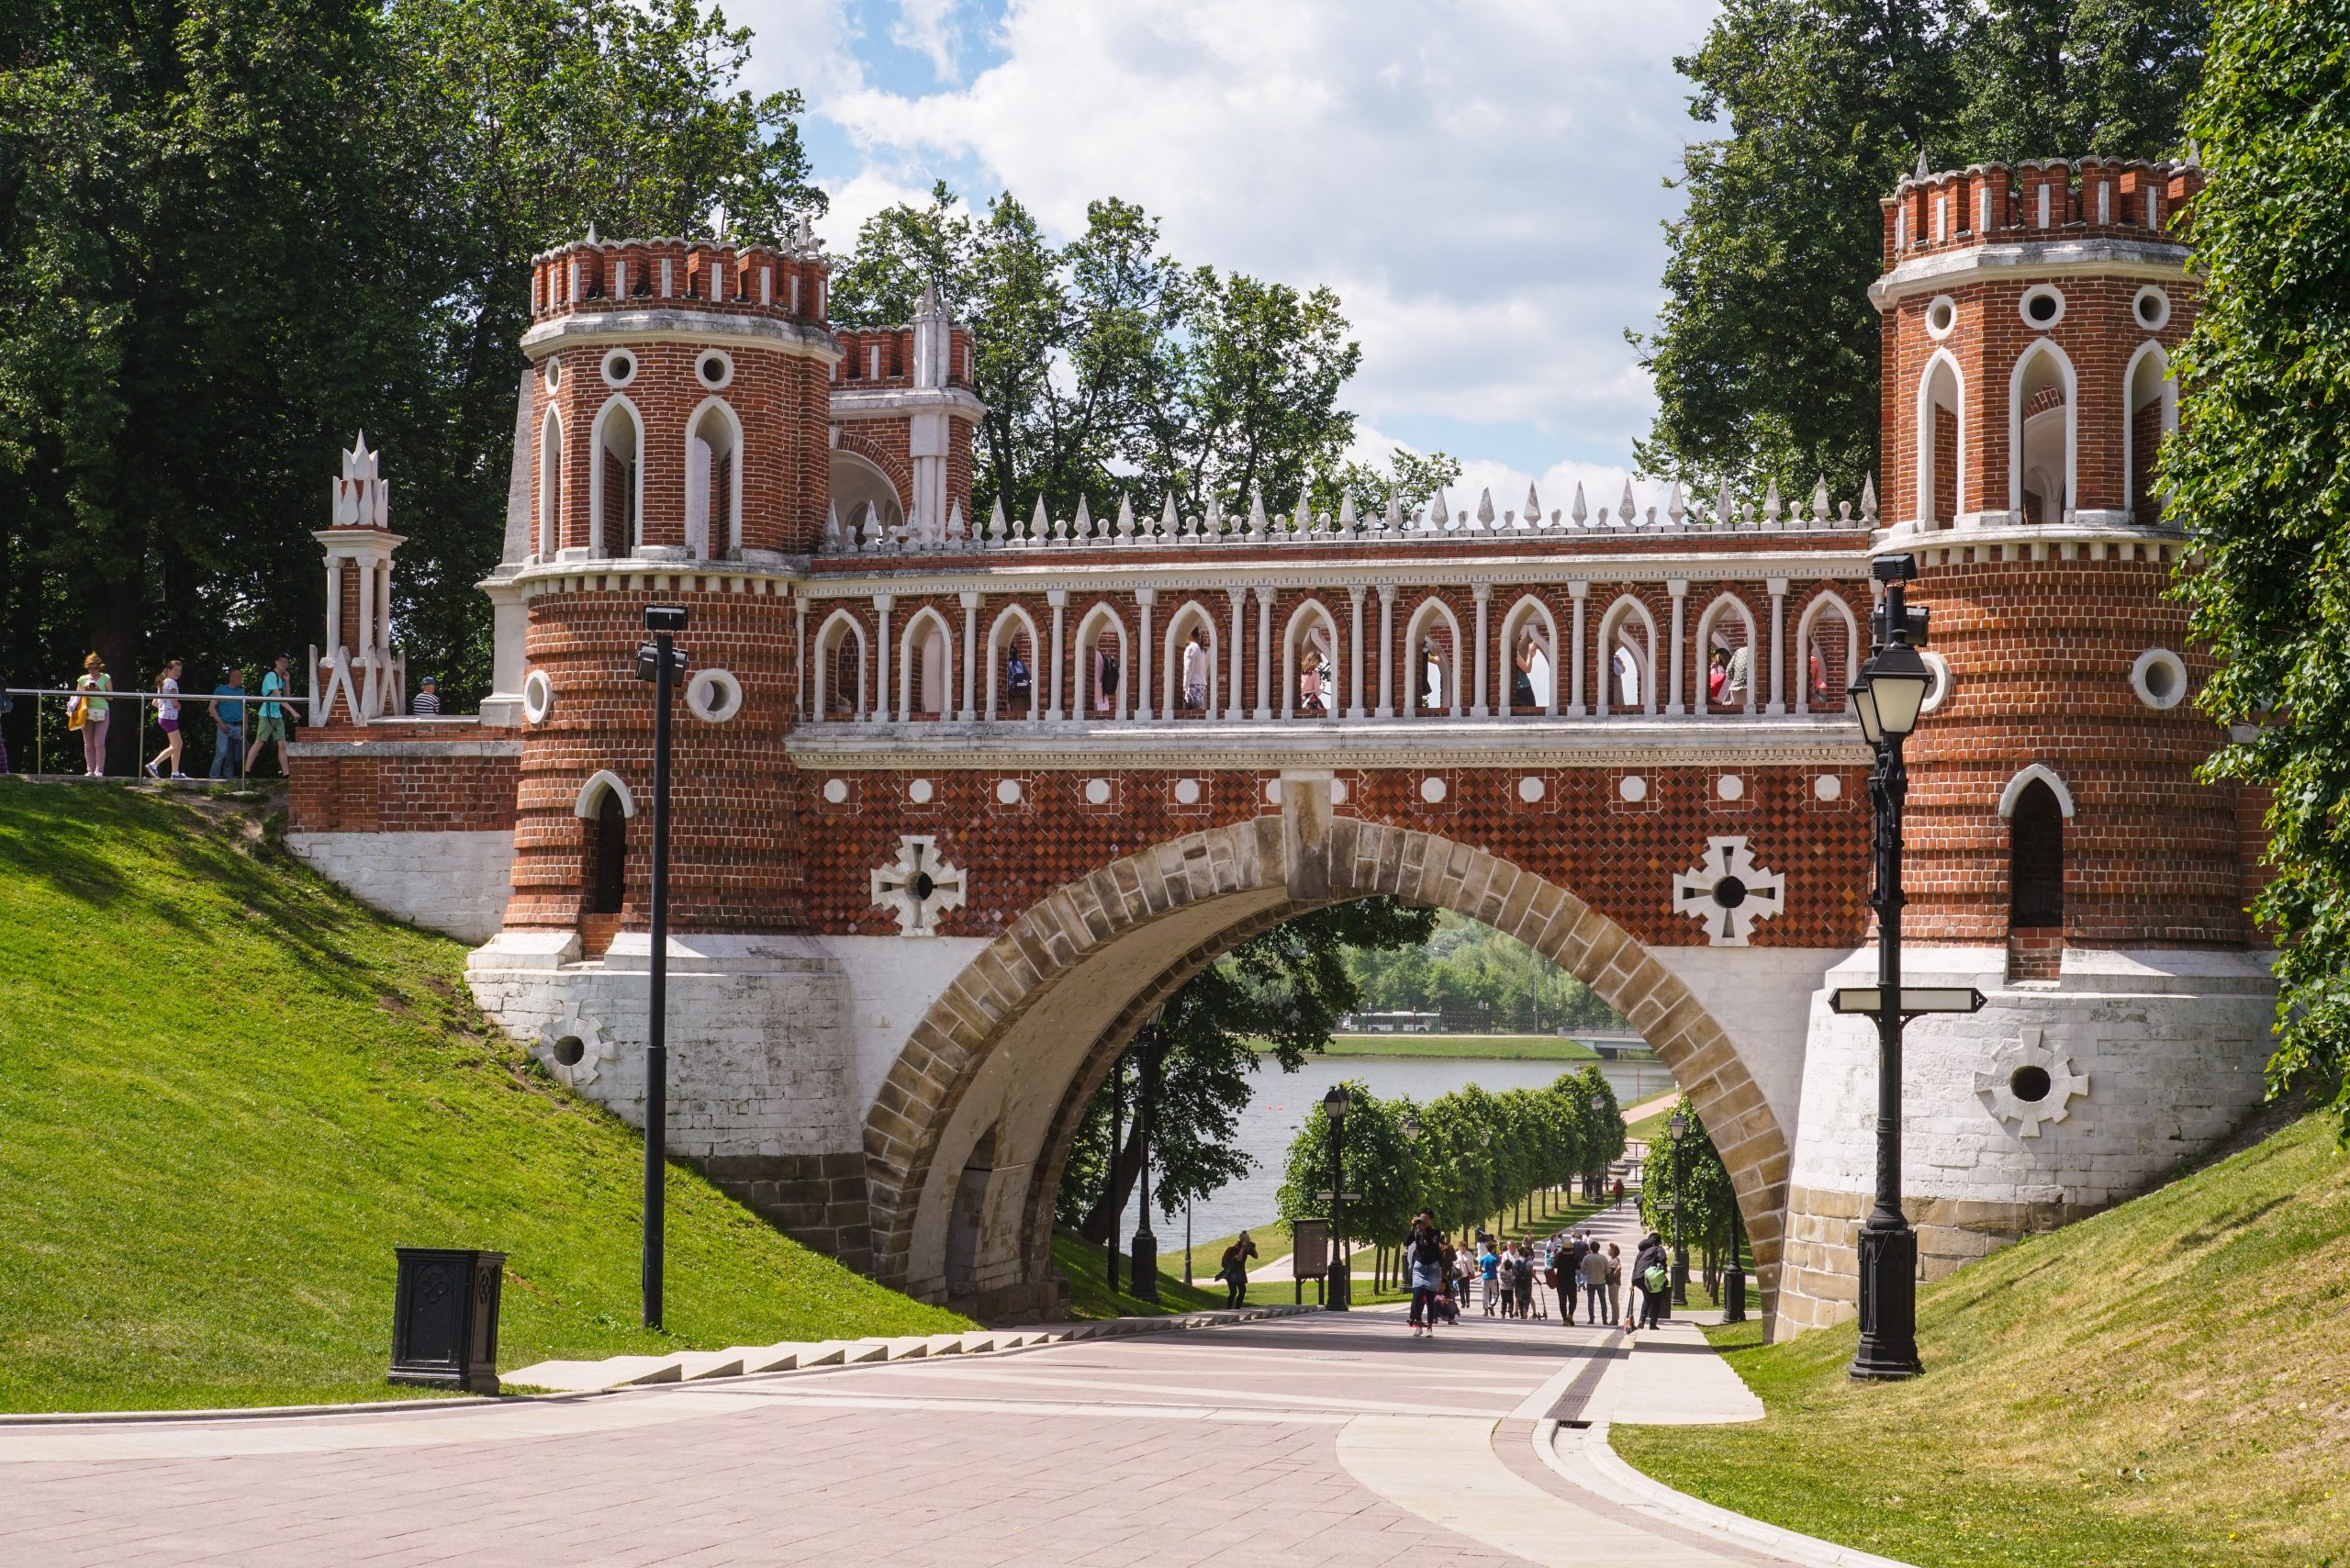 Figured,Bridge,In,The,Museum-reserve,Tsaritsyno.,It,Is,Actually,The